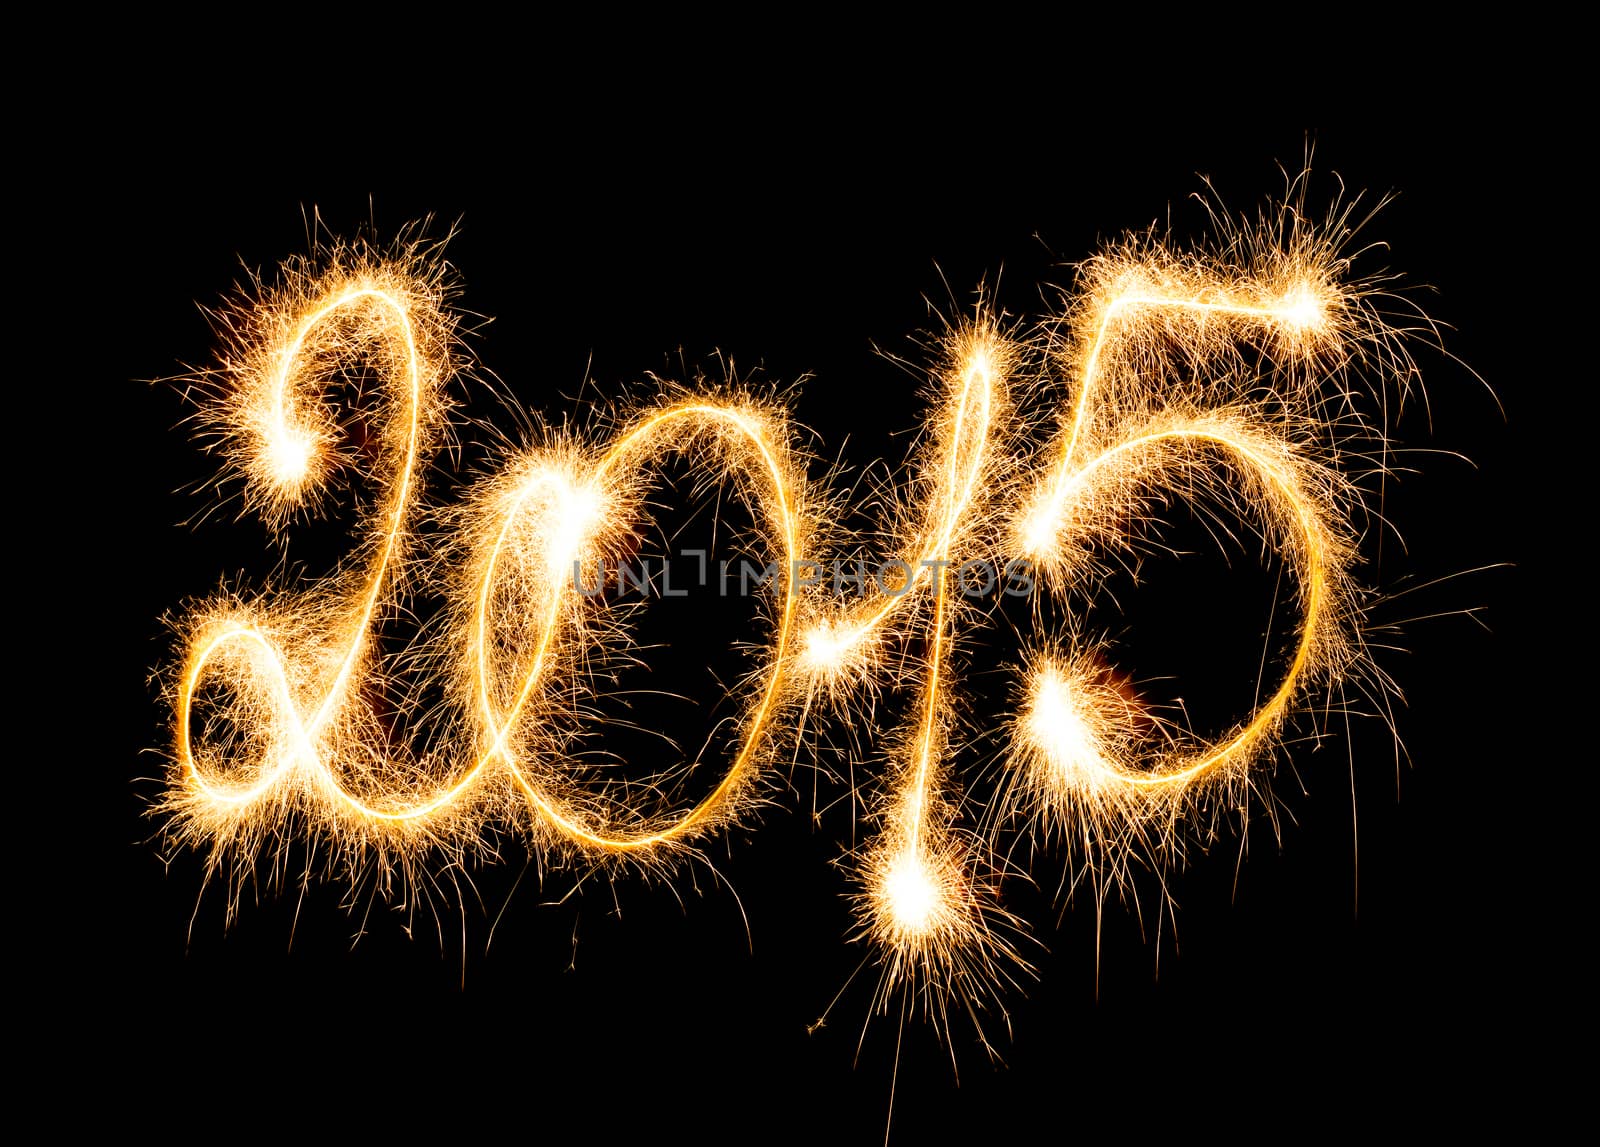 Happy New Year - 2015 with sparklers